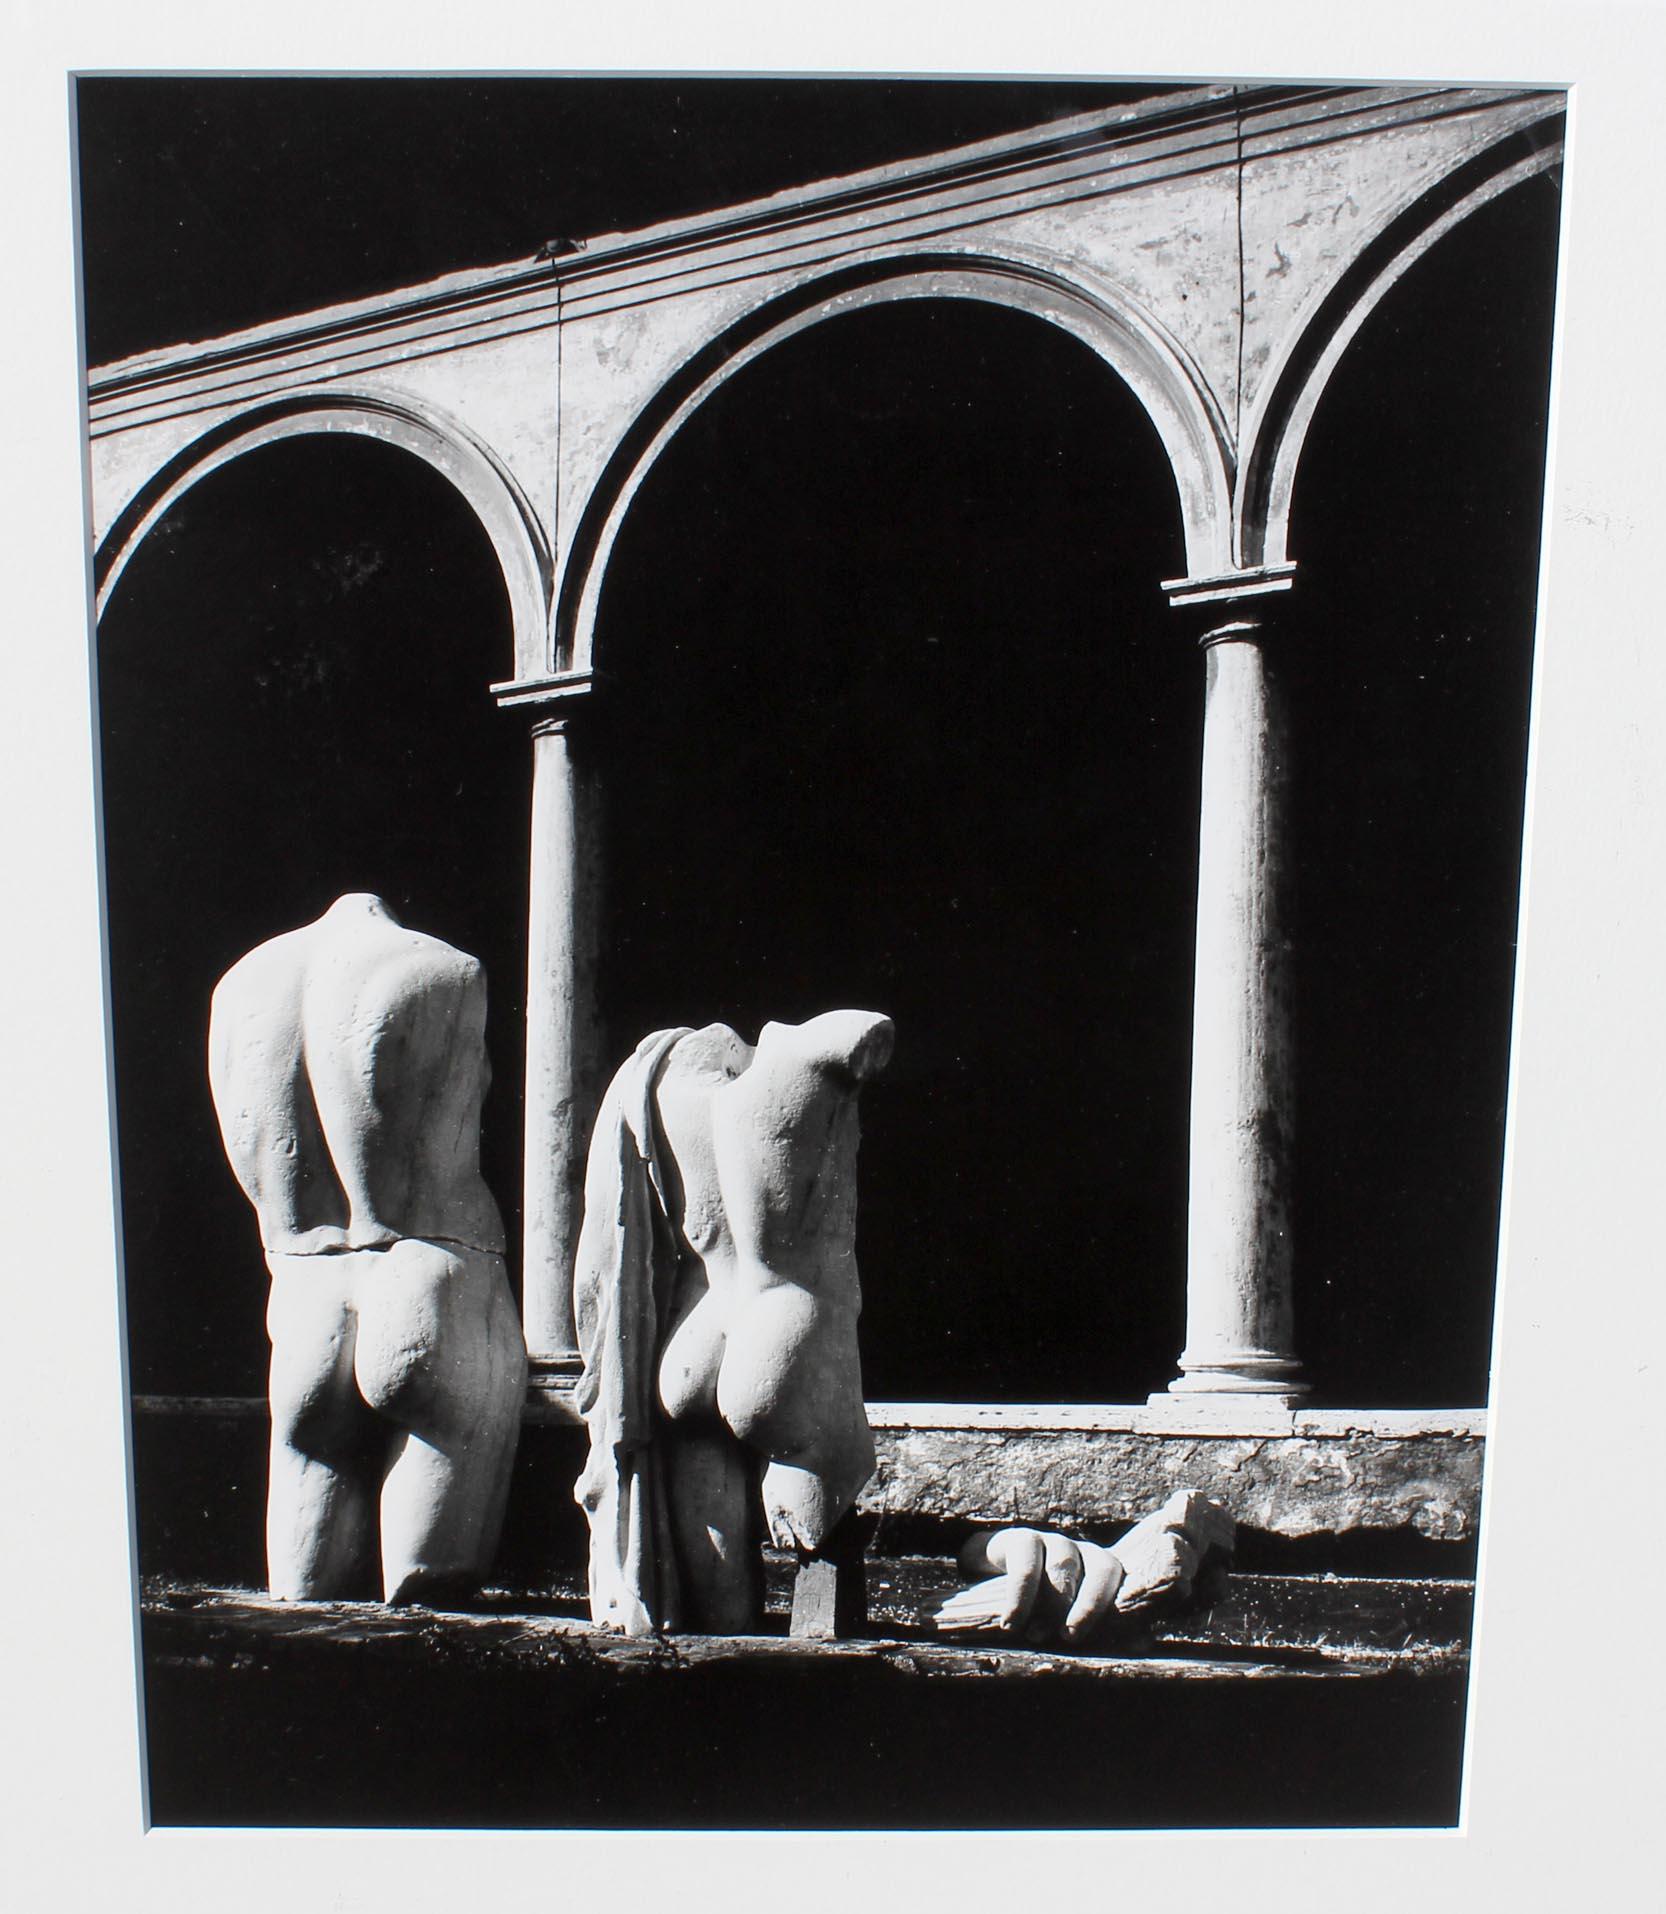 Mid 20th century black and white photographs of classical sculpture. Set of three. As Mr Codax collected Czech photographers. Unsigned. Matted and framed.
Provenance: Estate of Phillip Condax former curator George Eastman House International Museum